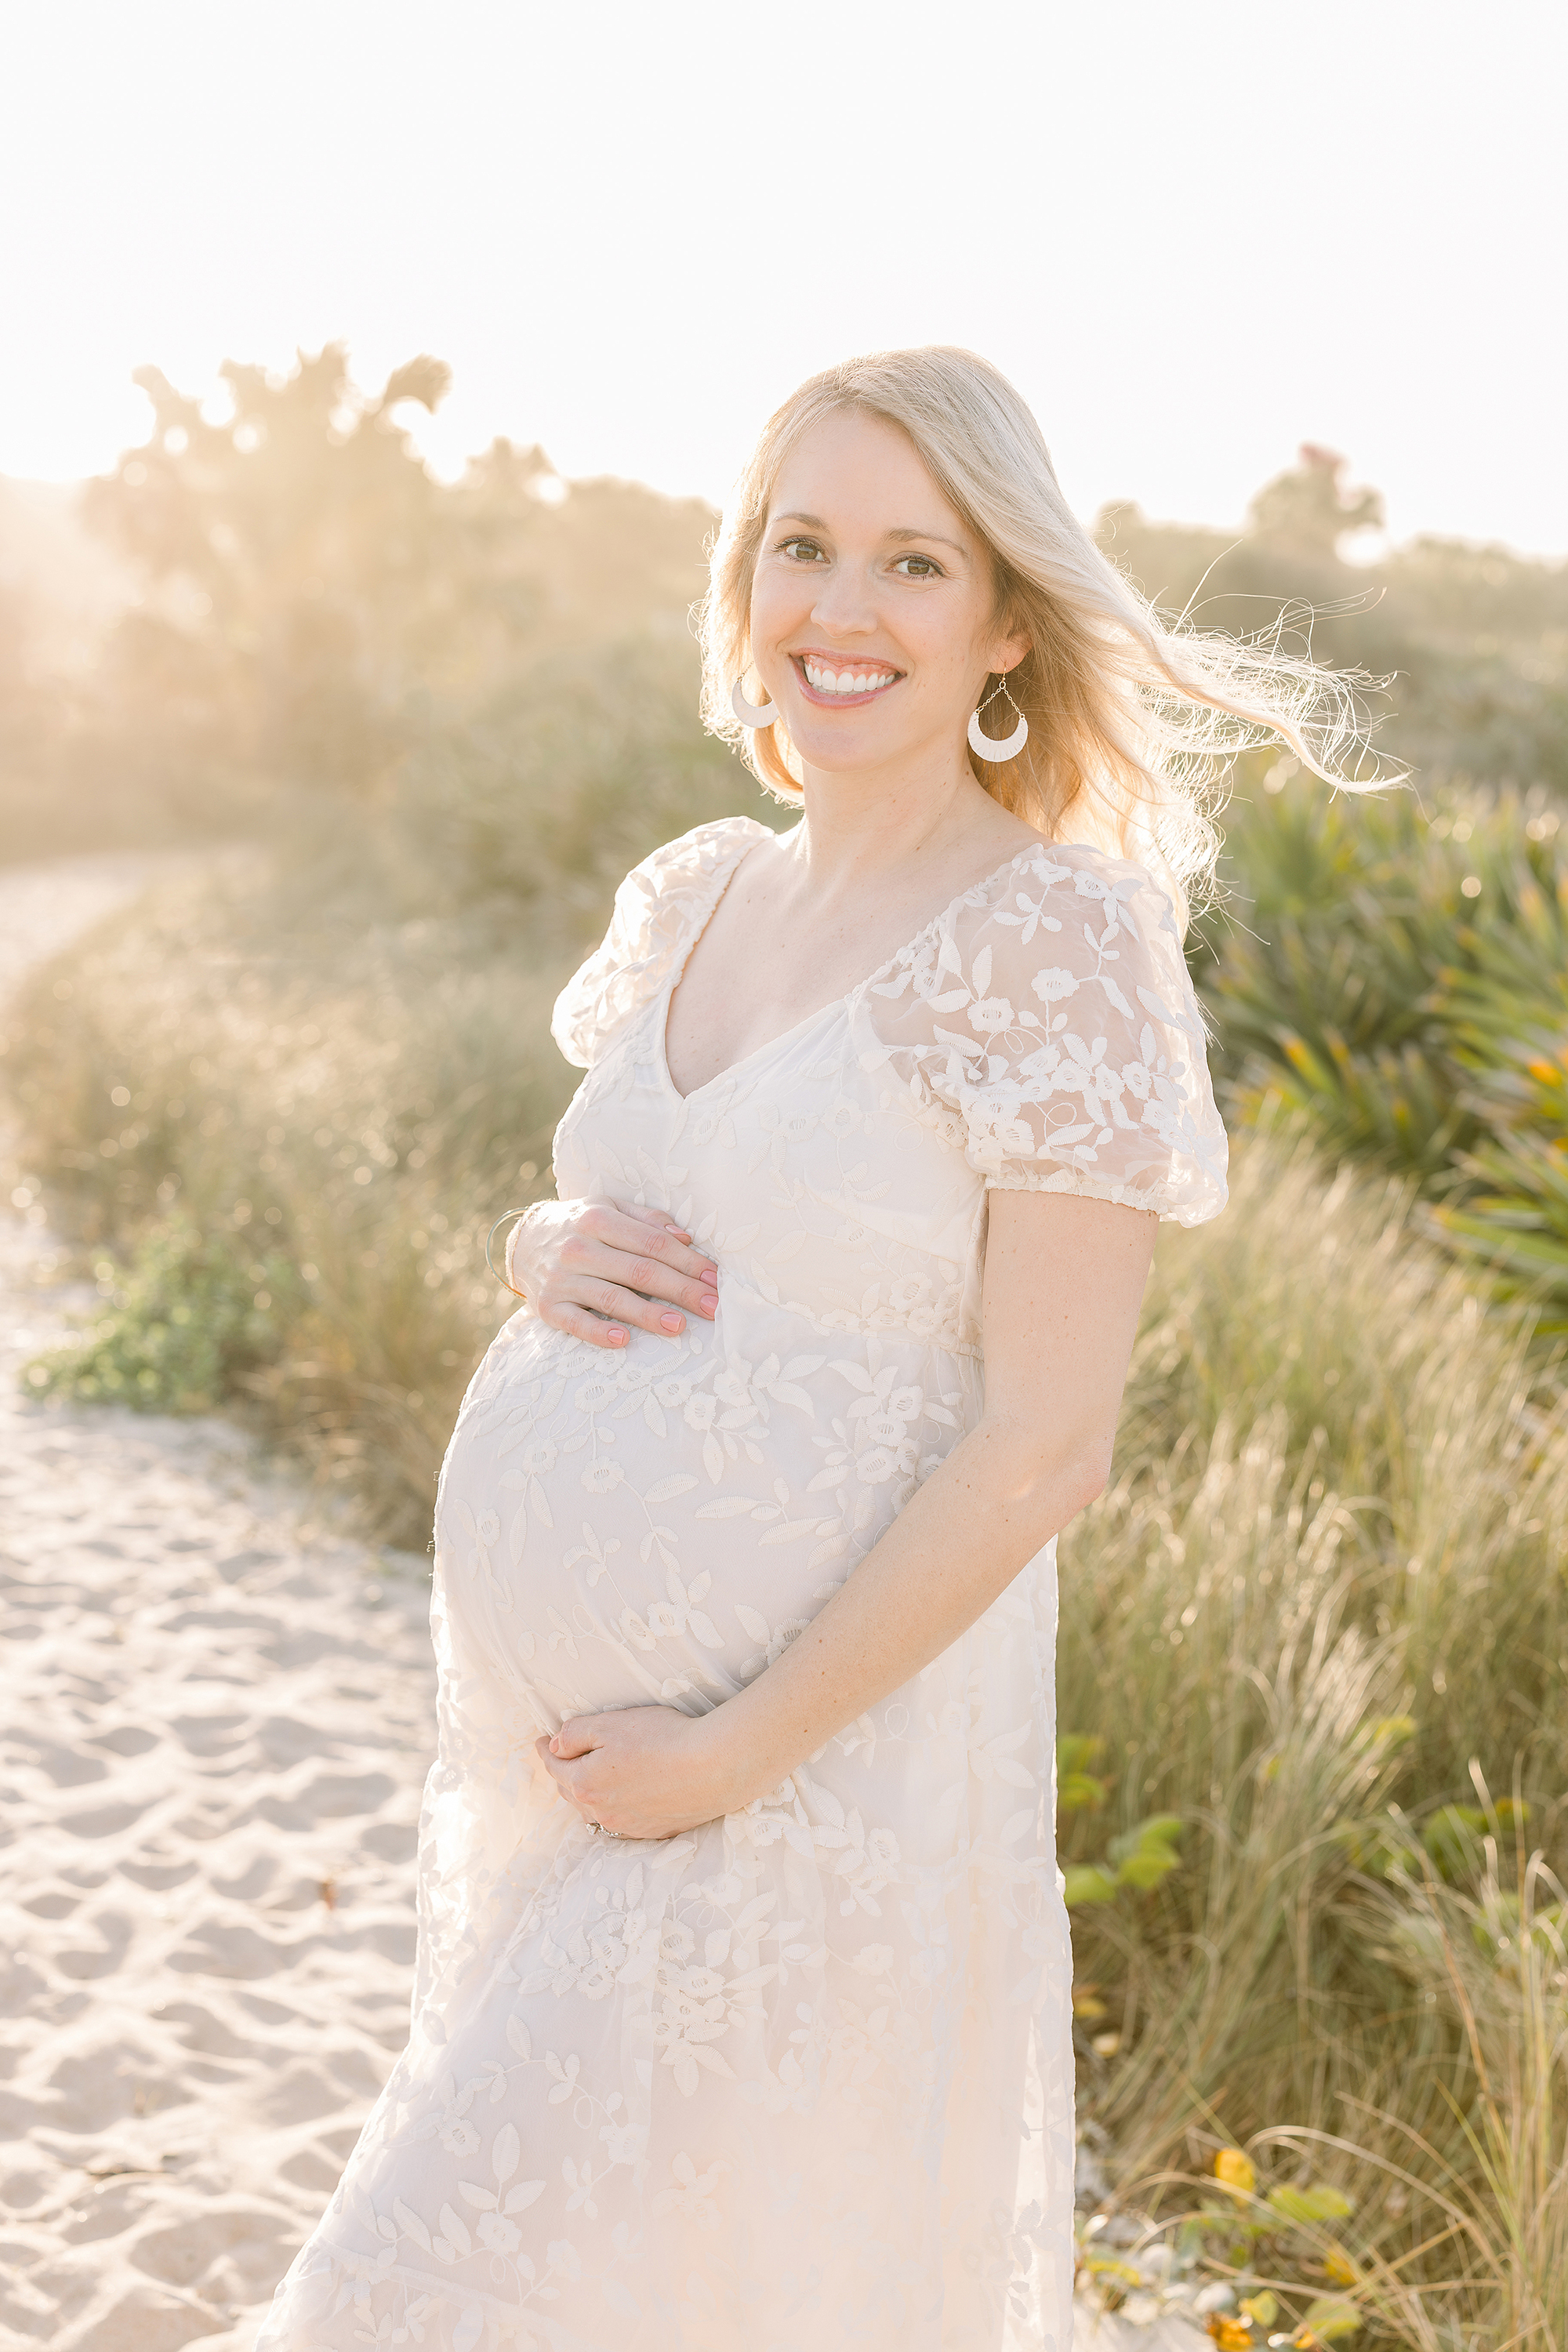 A pregnancy portrait of a woman on the beach at sunset during the Golden Hour.